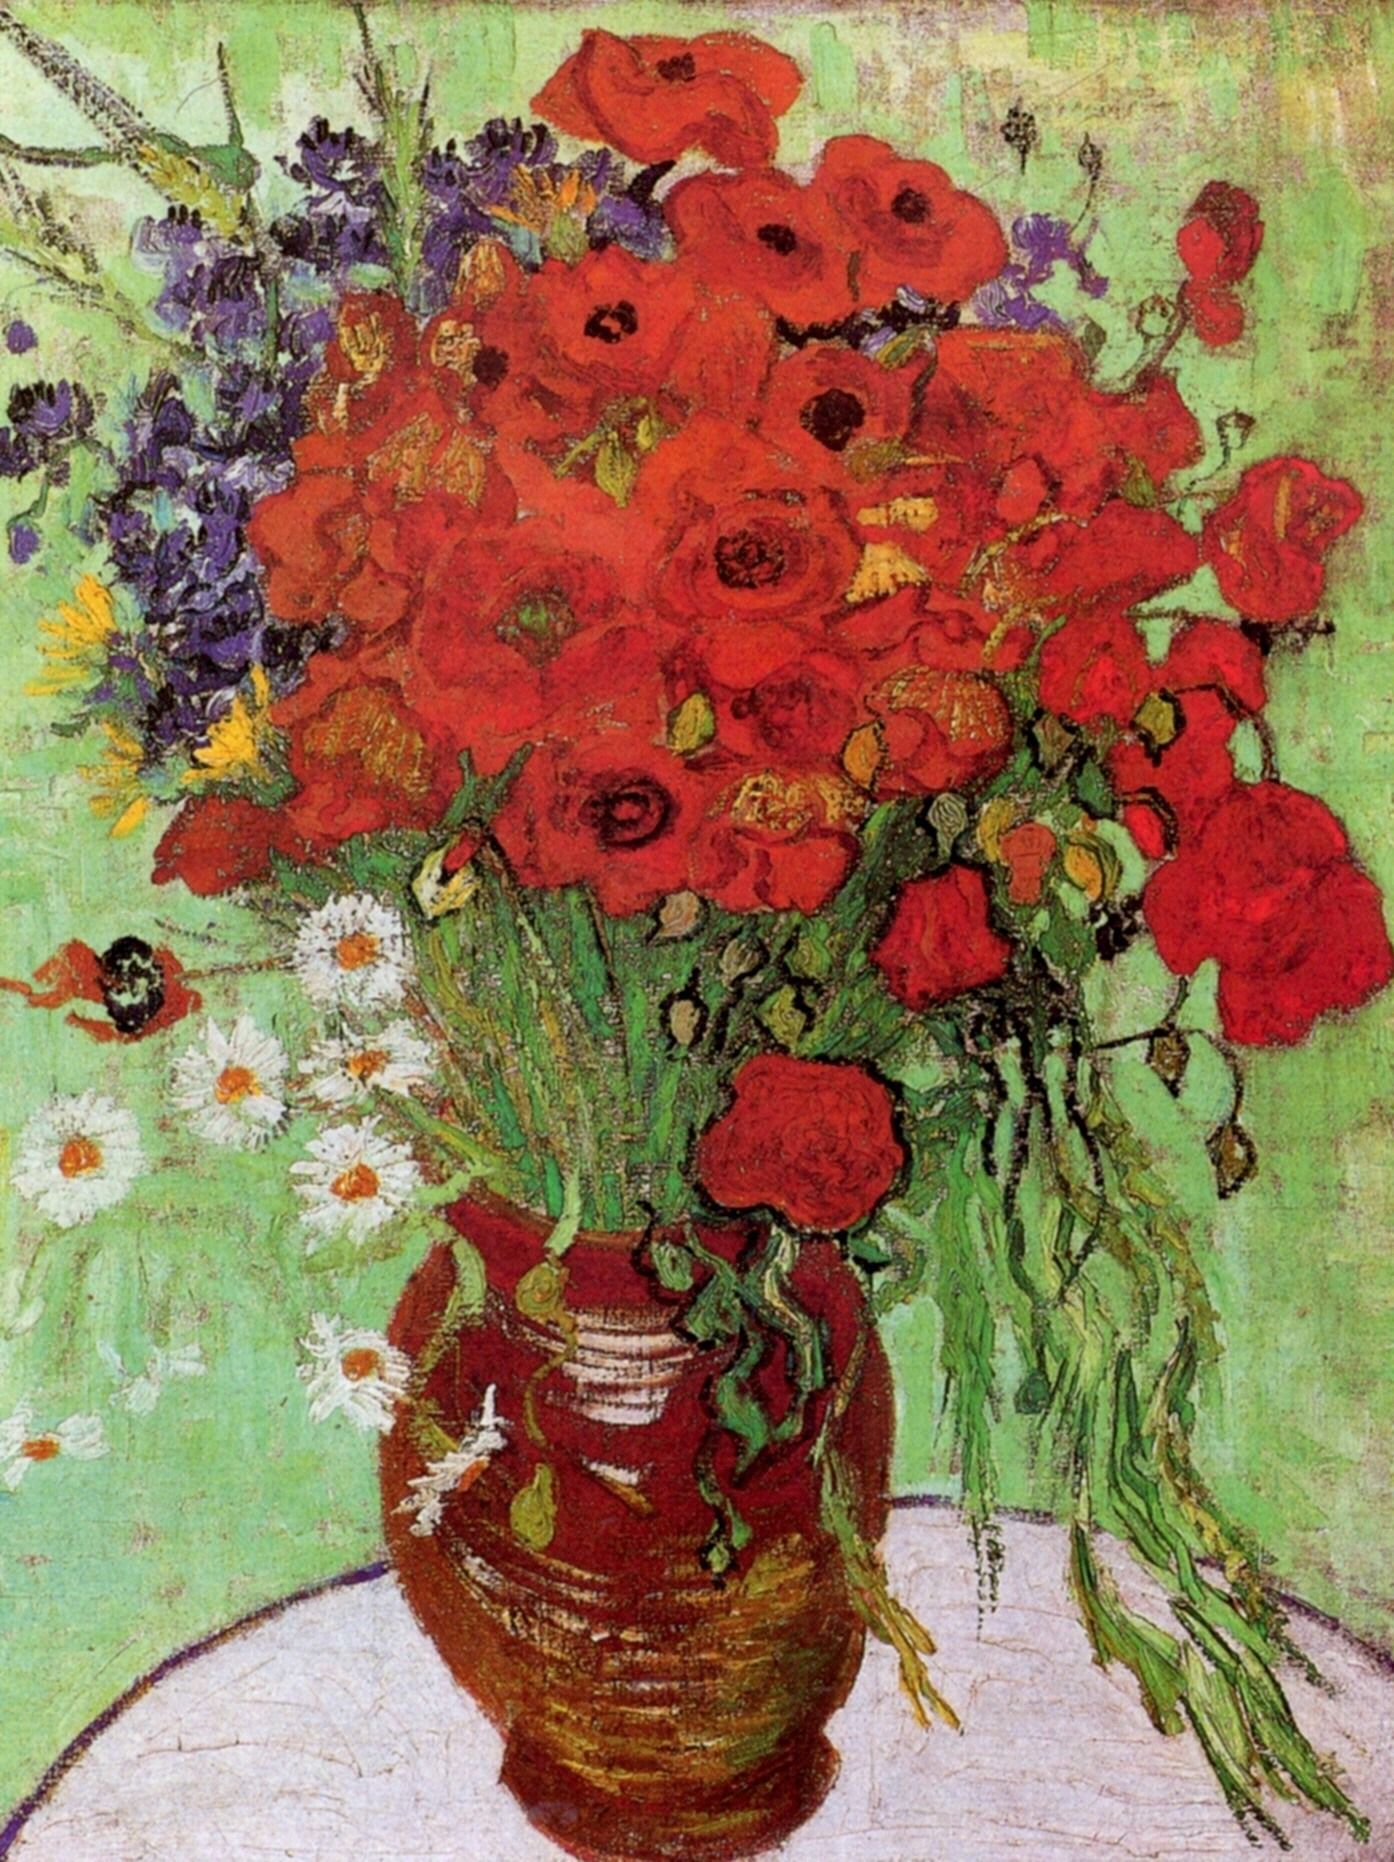 Red Poppies and Daisies – Vincent van Gogh. I'm wondering why you mainly see